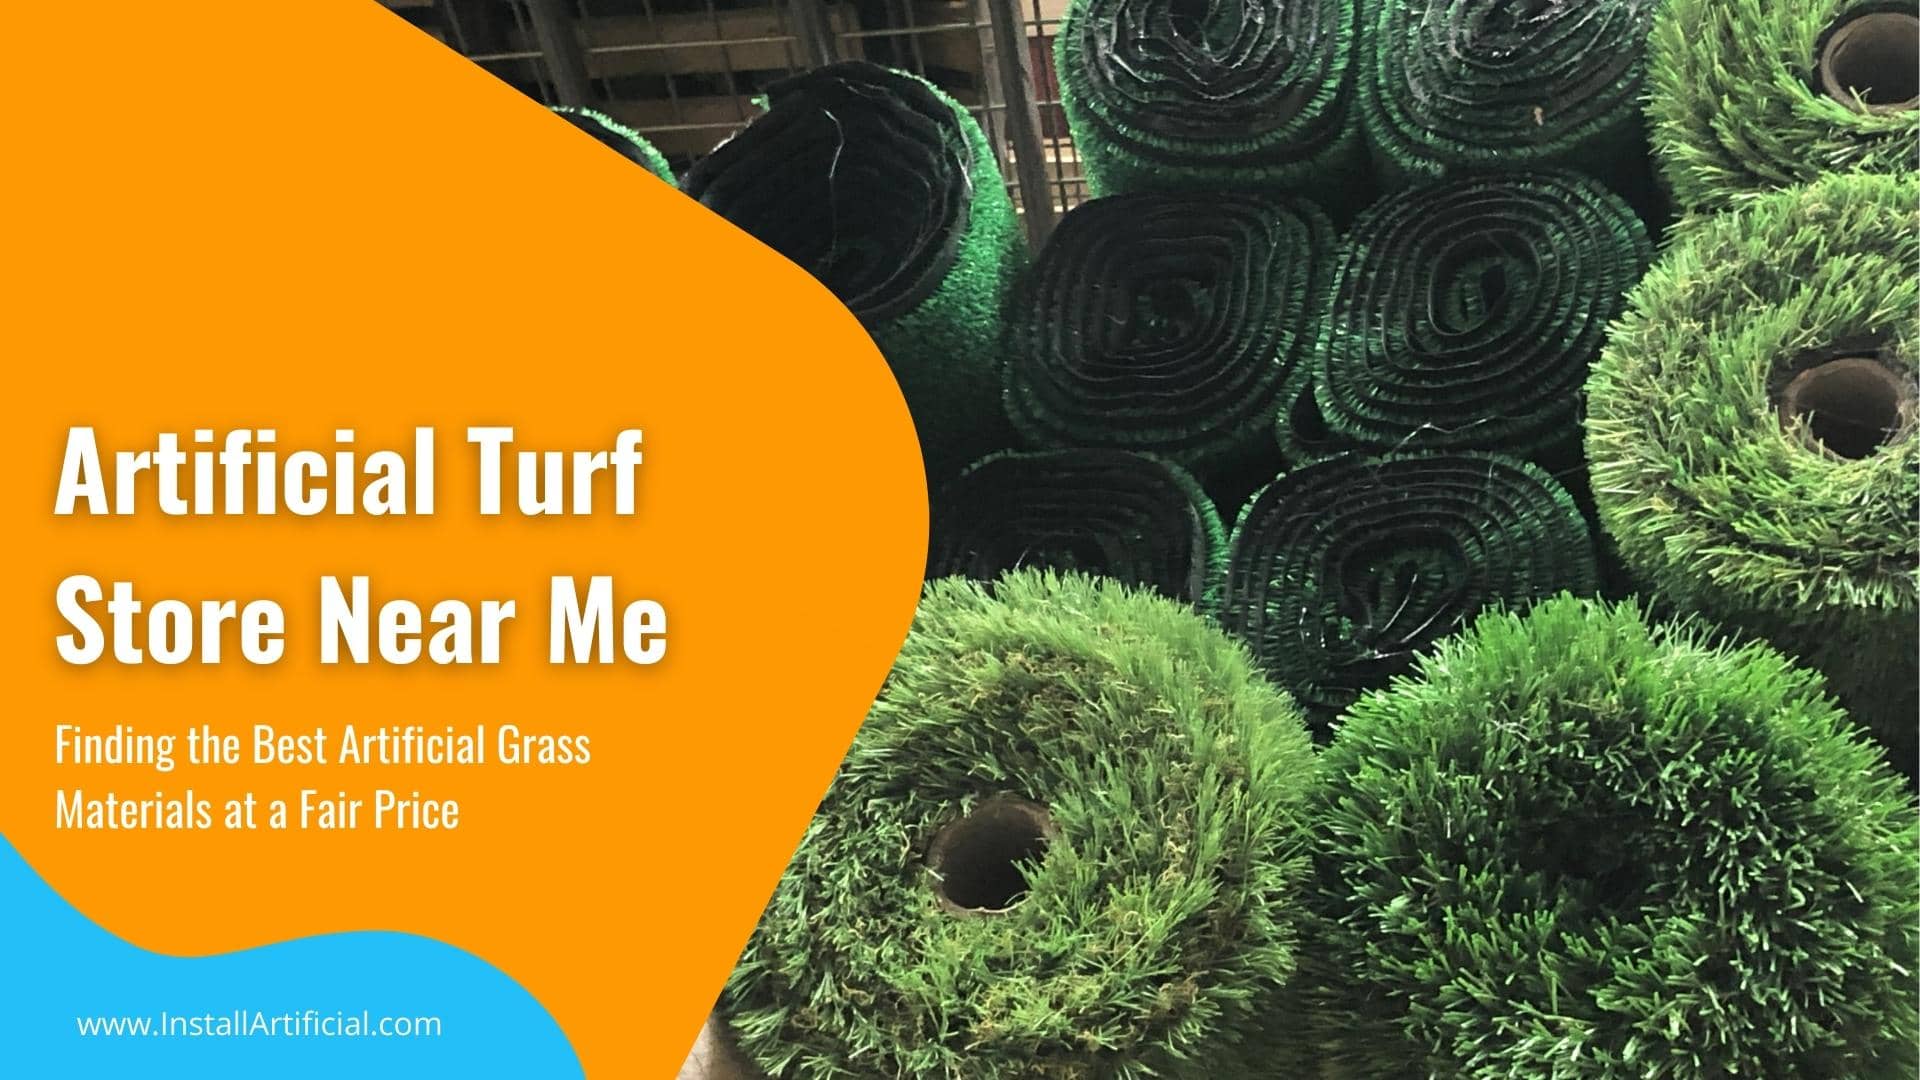 Artificial Turf Stores Near Me